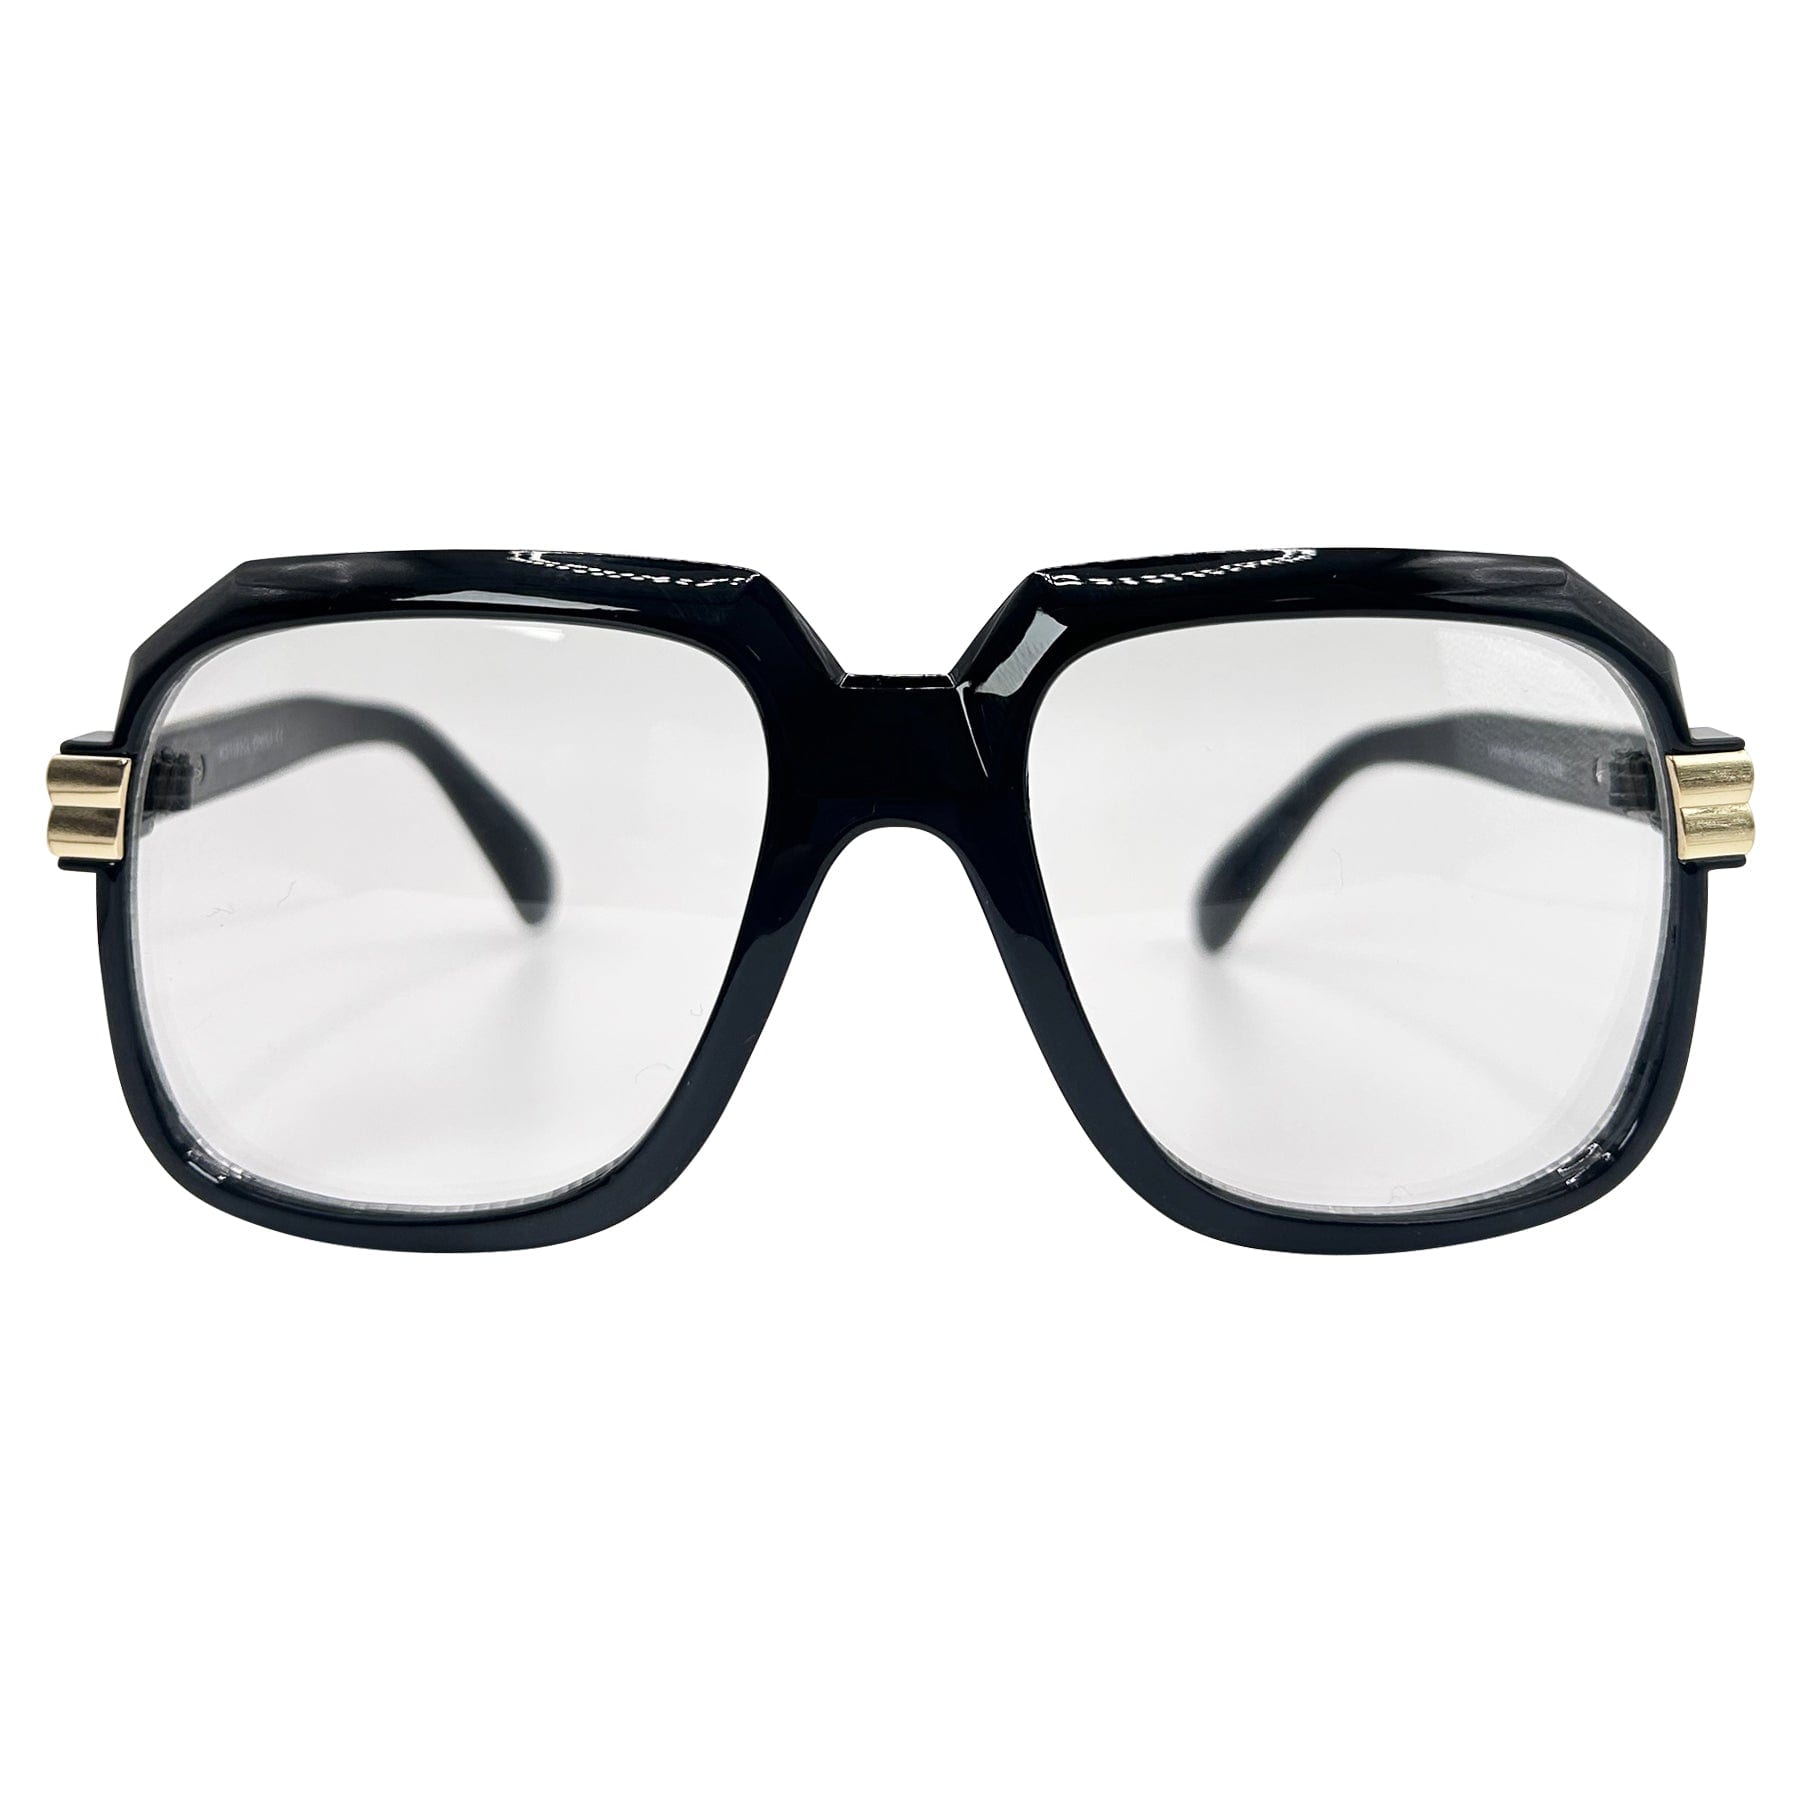 square oversized glasses with a black frame and clear lens